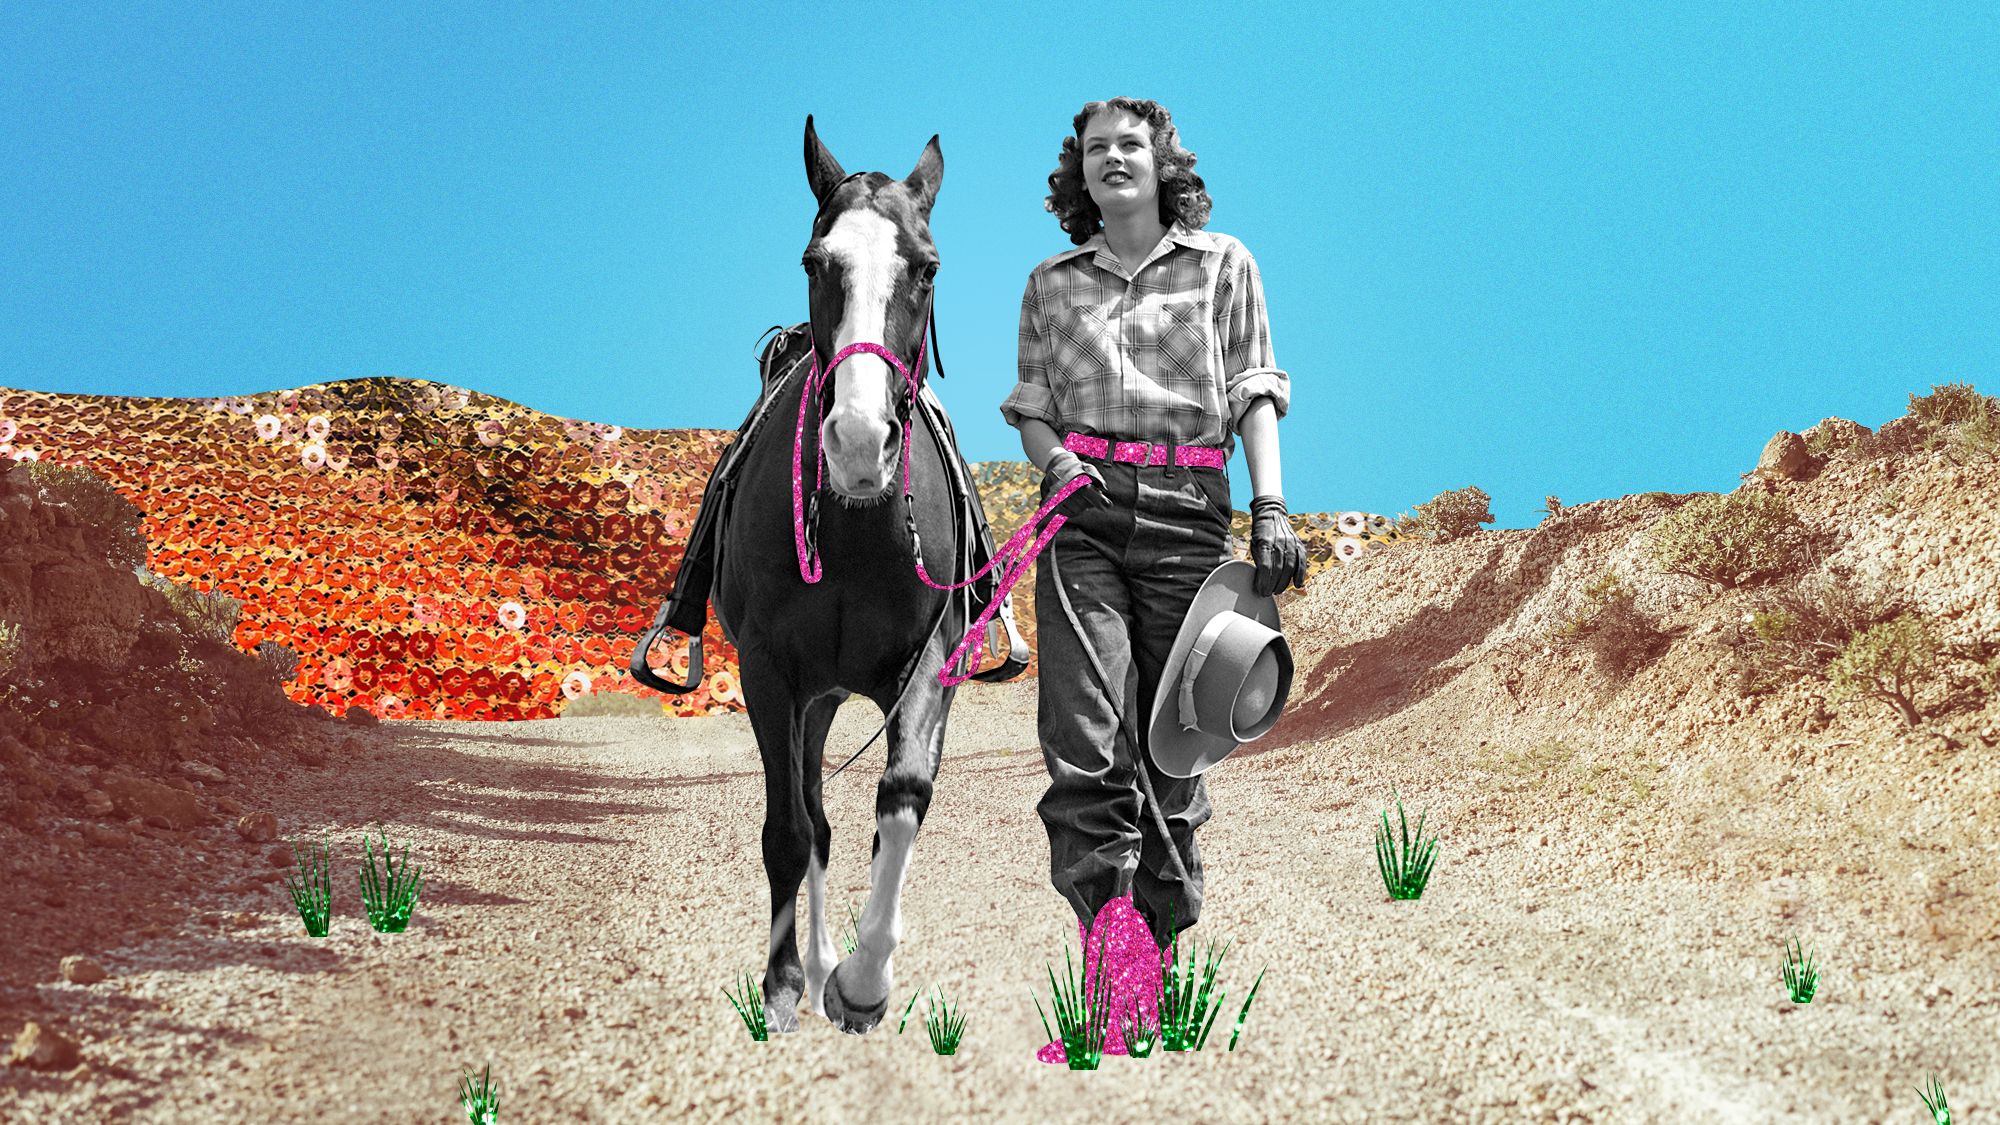 A History of Cowgirl Couture, From Calamity Jane to Beyoncé